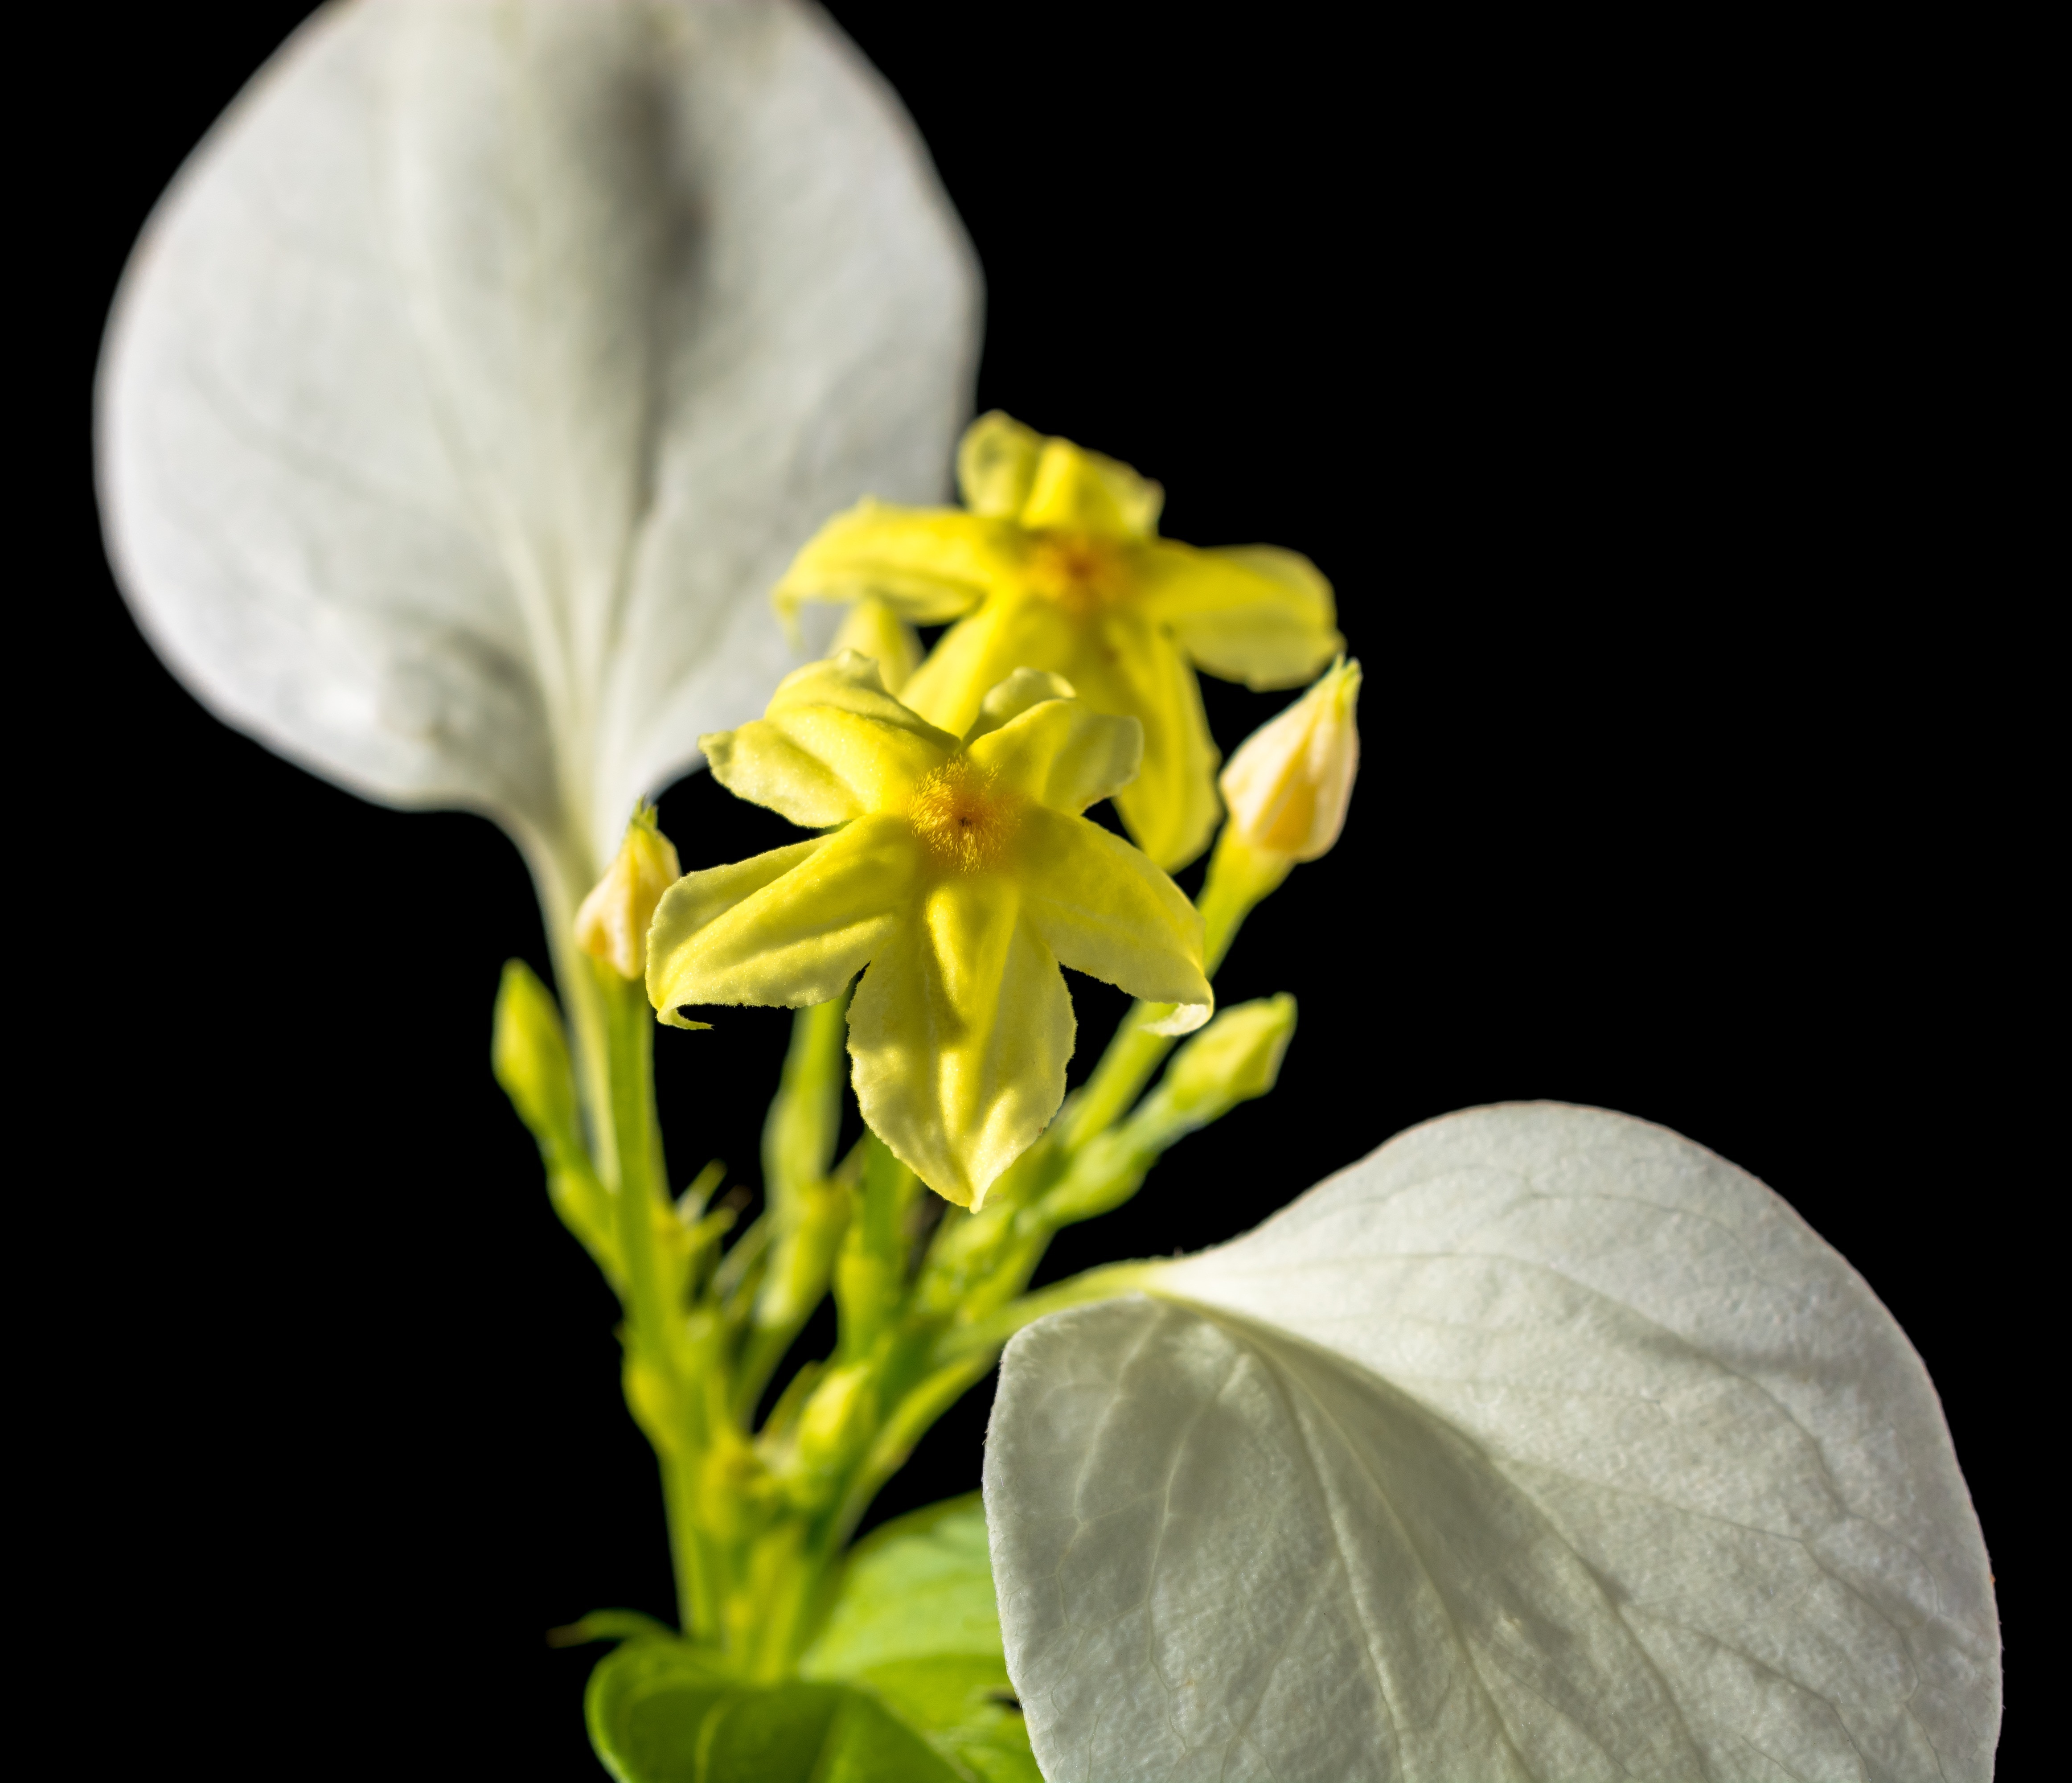 yellow and white petal flowers